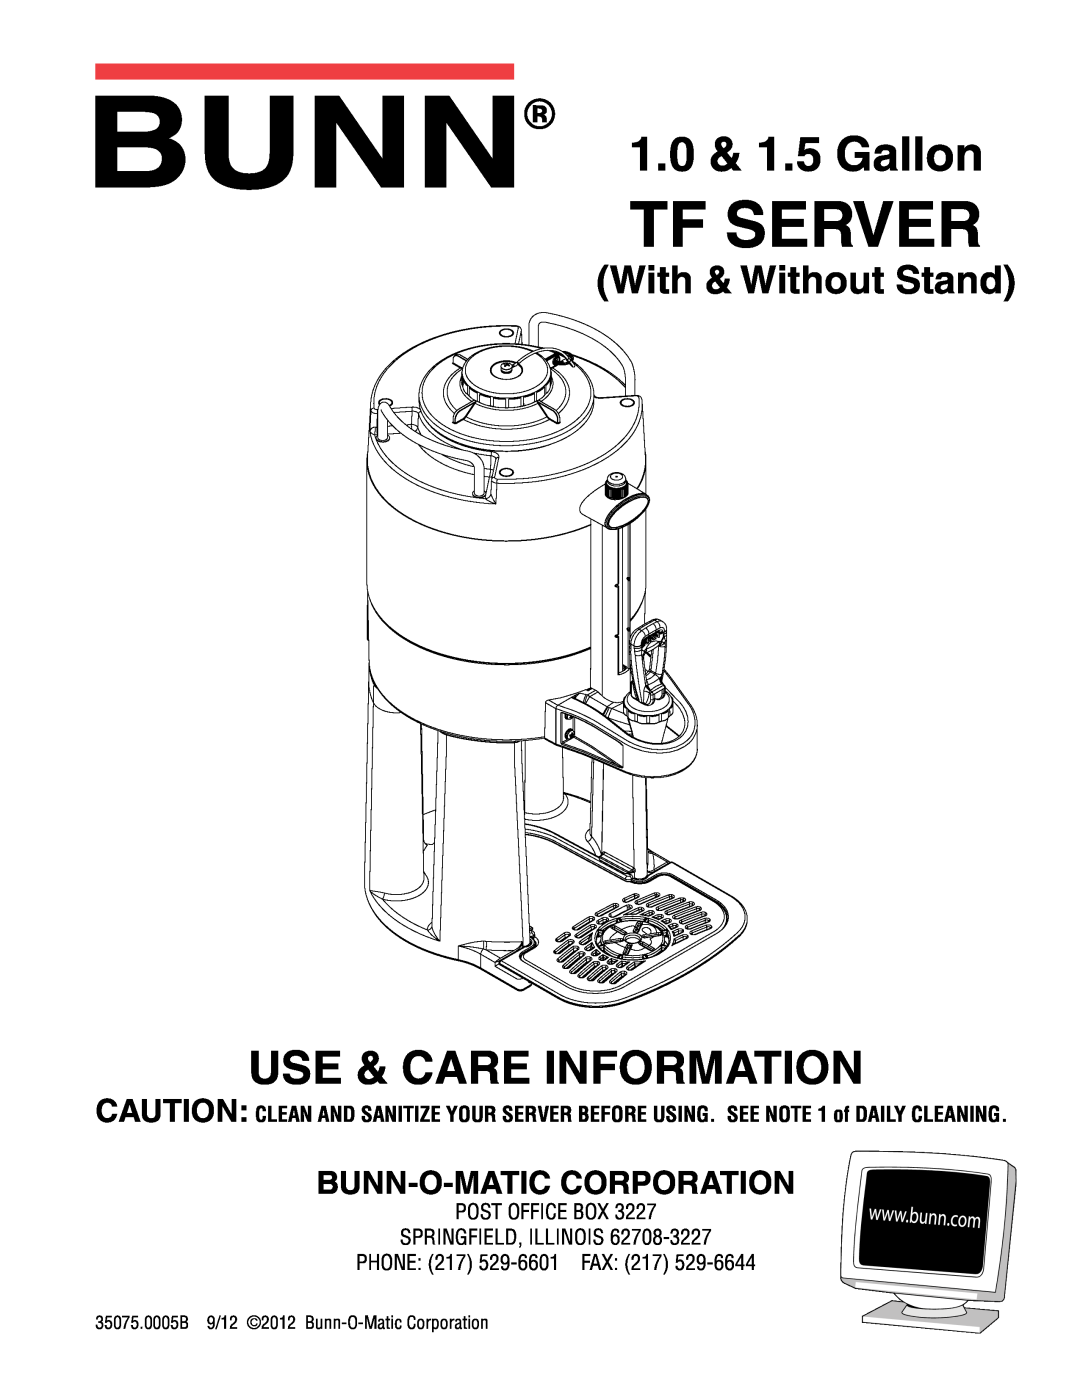 Bunn 350750005B manual Tf Server, 1.0 & 1.5 Gallon, Use & Care Information, With & Without Stand, Bunn-O-Maticcorporation 